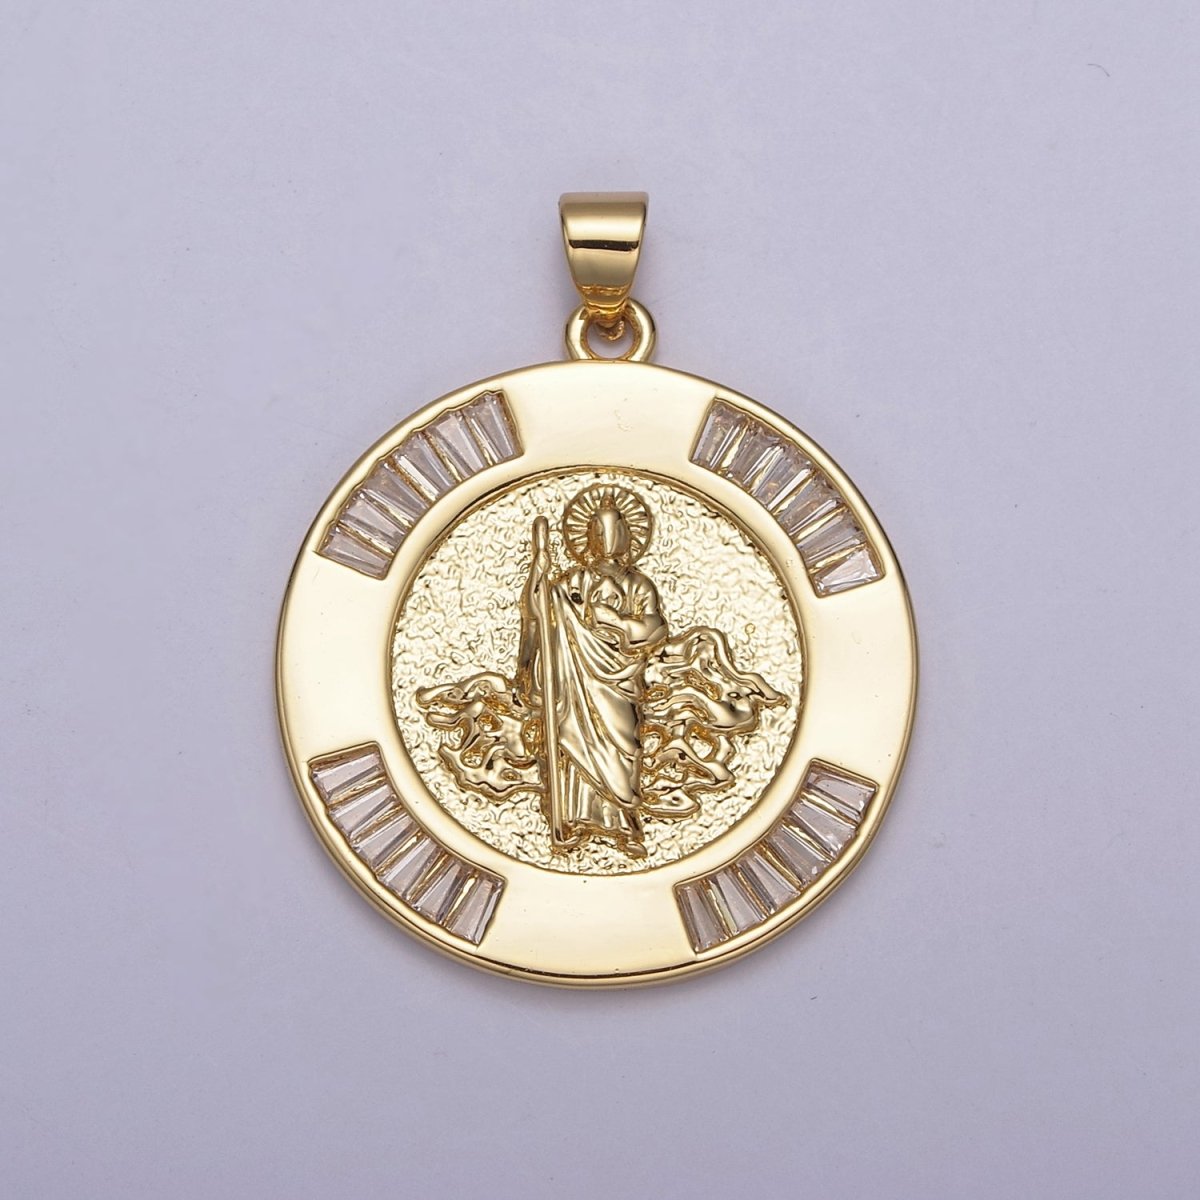 Gold Coin Medallion Religious Pendant Saint Jude / Lady Guadalupe Virgin Mary Charm for Jewelry Making Supply H-733 H-734 - DLUXCA